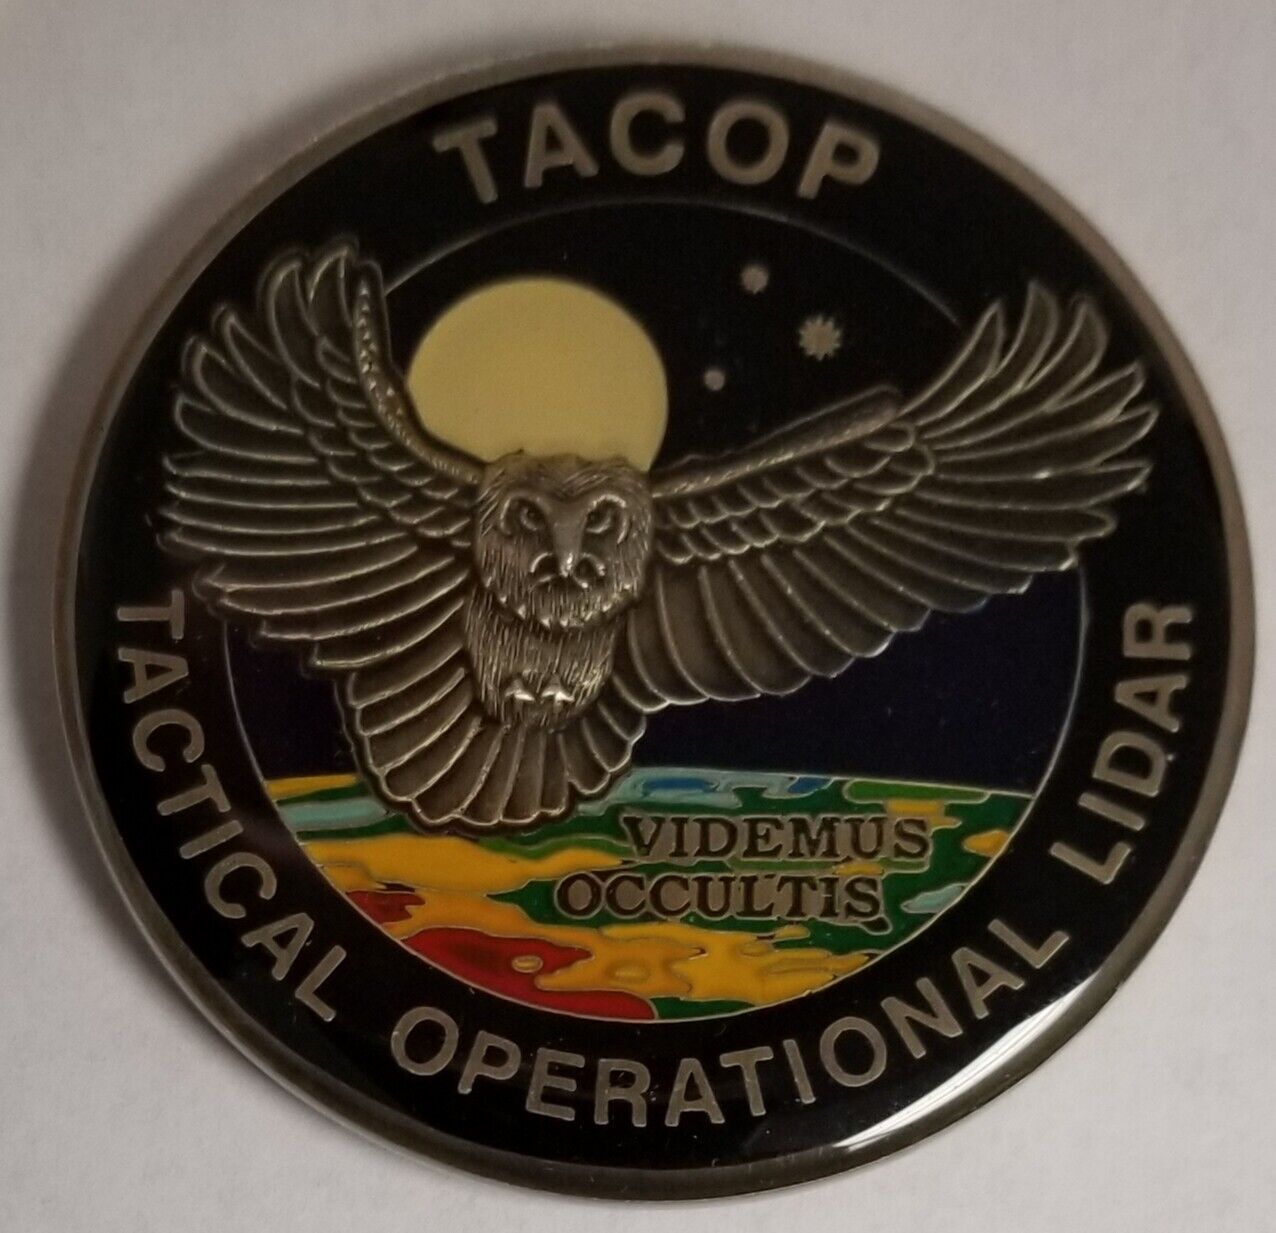 US ARMY TACOP TACTICAL OPERATIONAL LIDAR CONSTANT HAWK AFGHANISTAN Coin